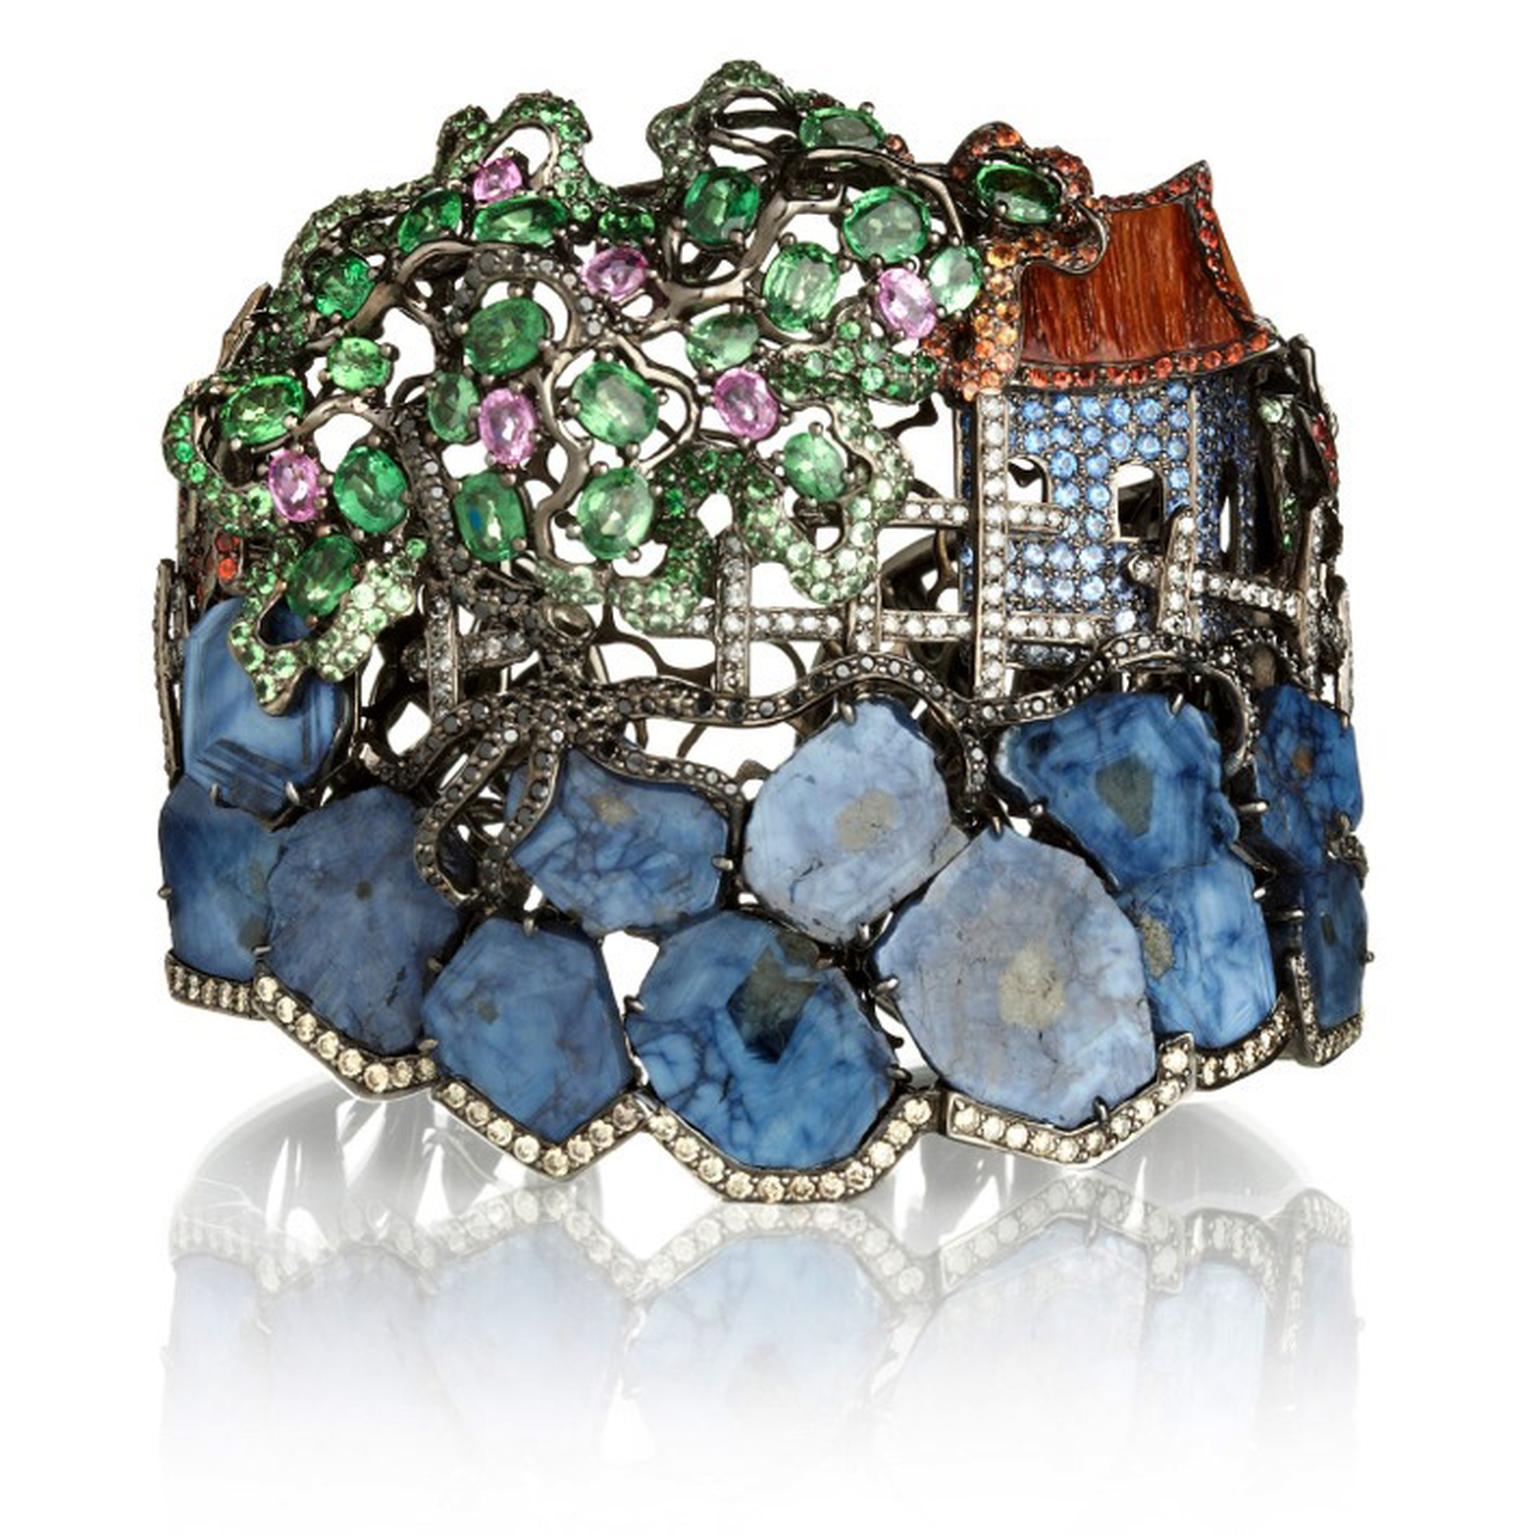 Wendy-Yue-Fantasie-18ct-white-gold,--diamond,sapphires-and-green-garnet-Madagascar-Retreat-bangle-By-Wendy-Yue--for-Annoushka.jpg